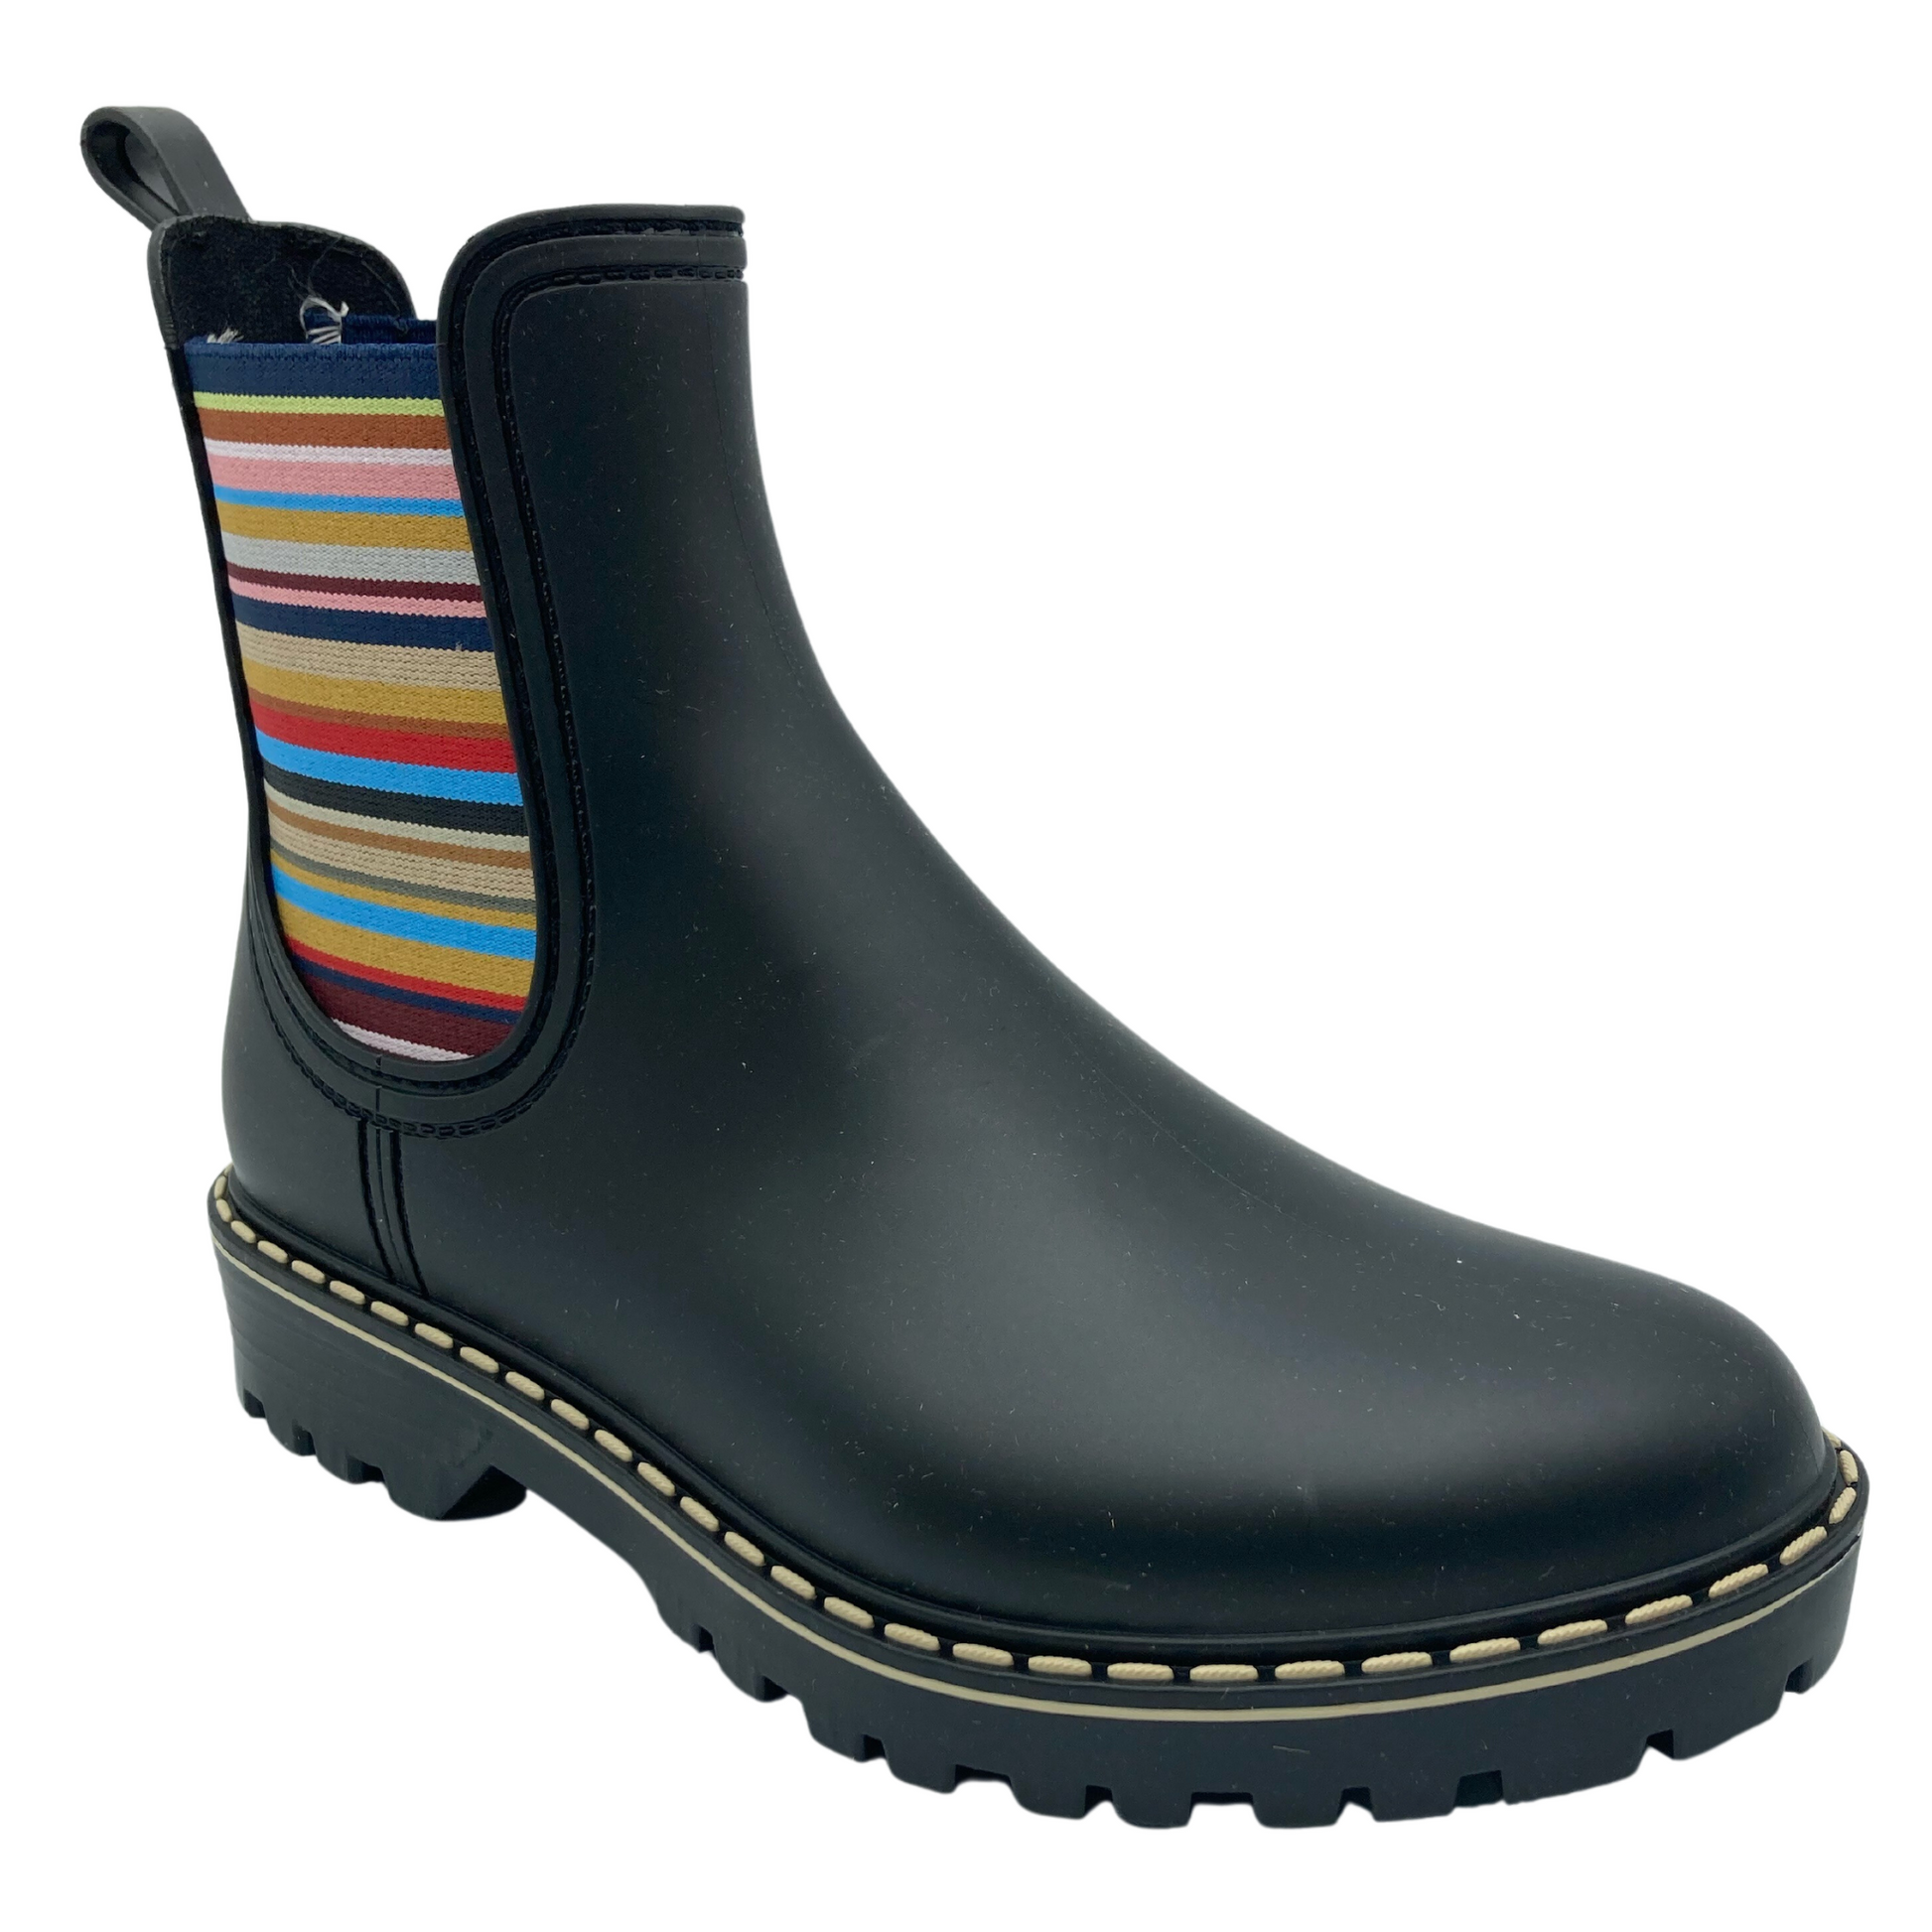 45 degree angled view of black short boot with multicoloured elastic side gore and black rubber outsole